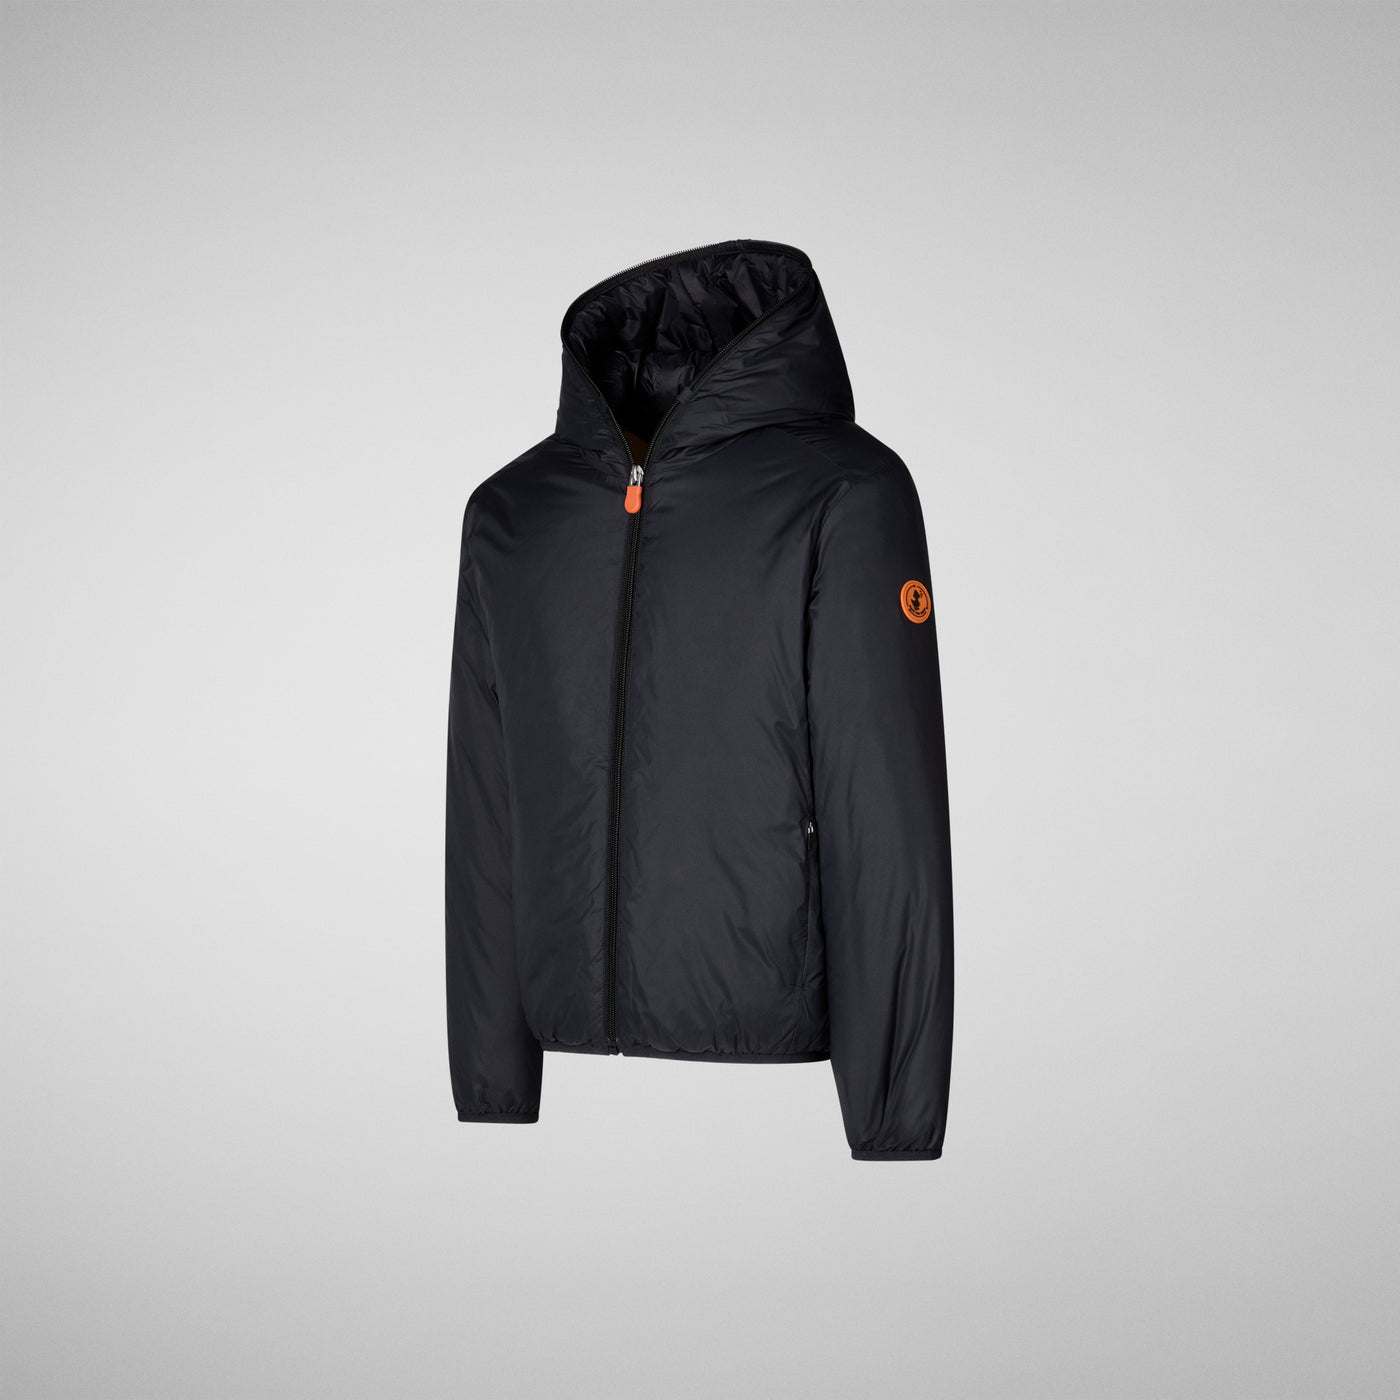 Product Side View of Kids' Josh Hooded Jacket in Black